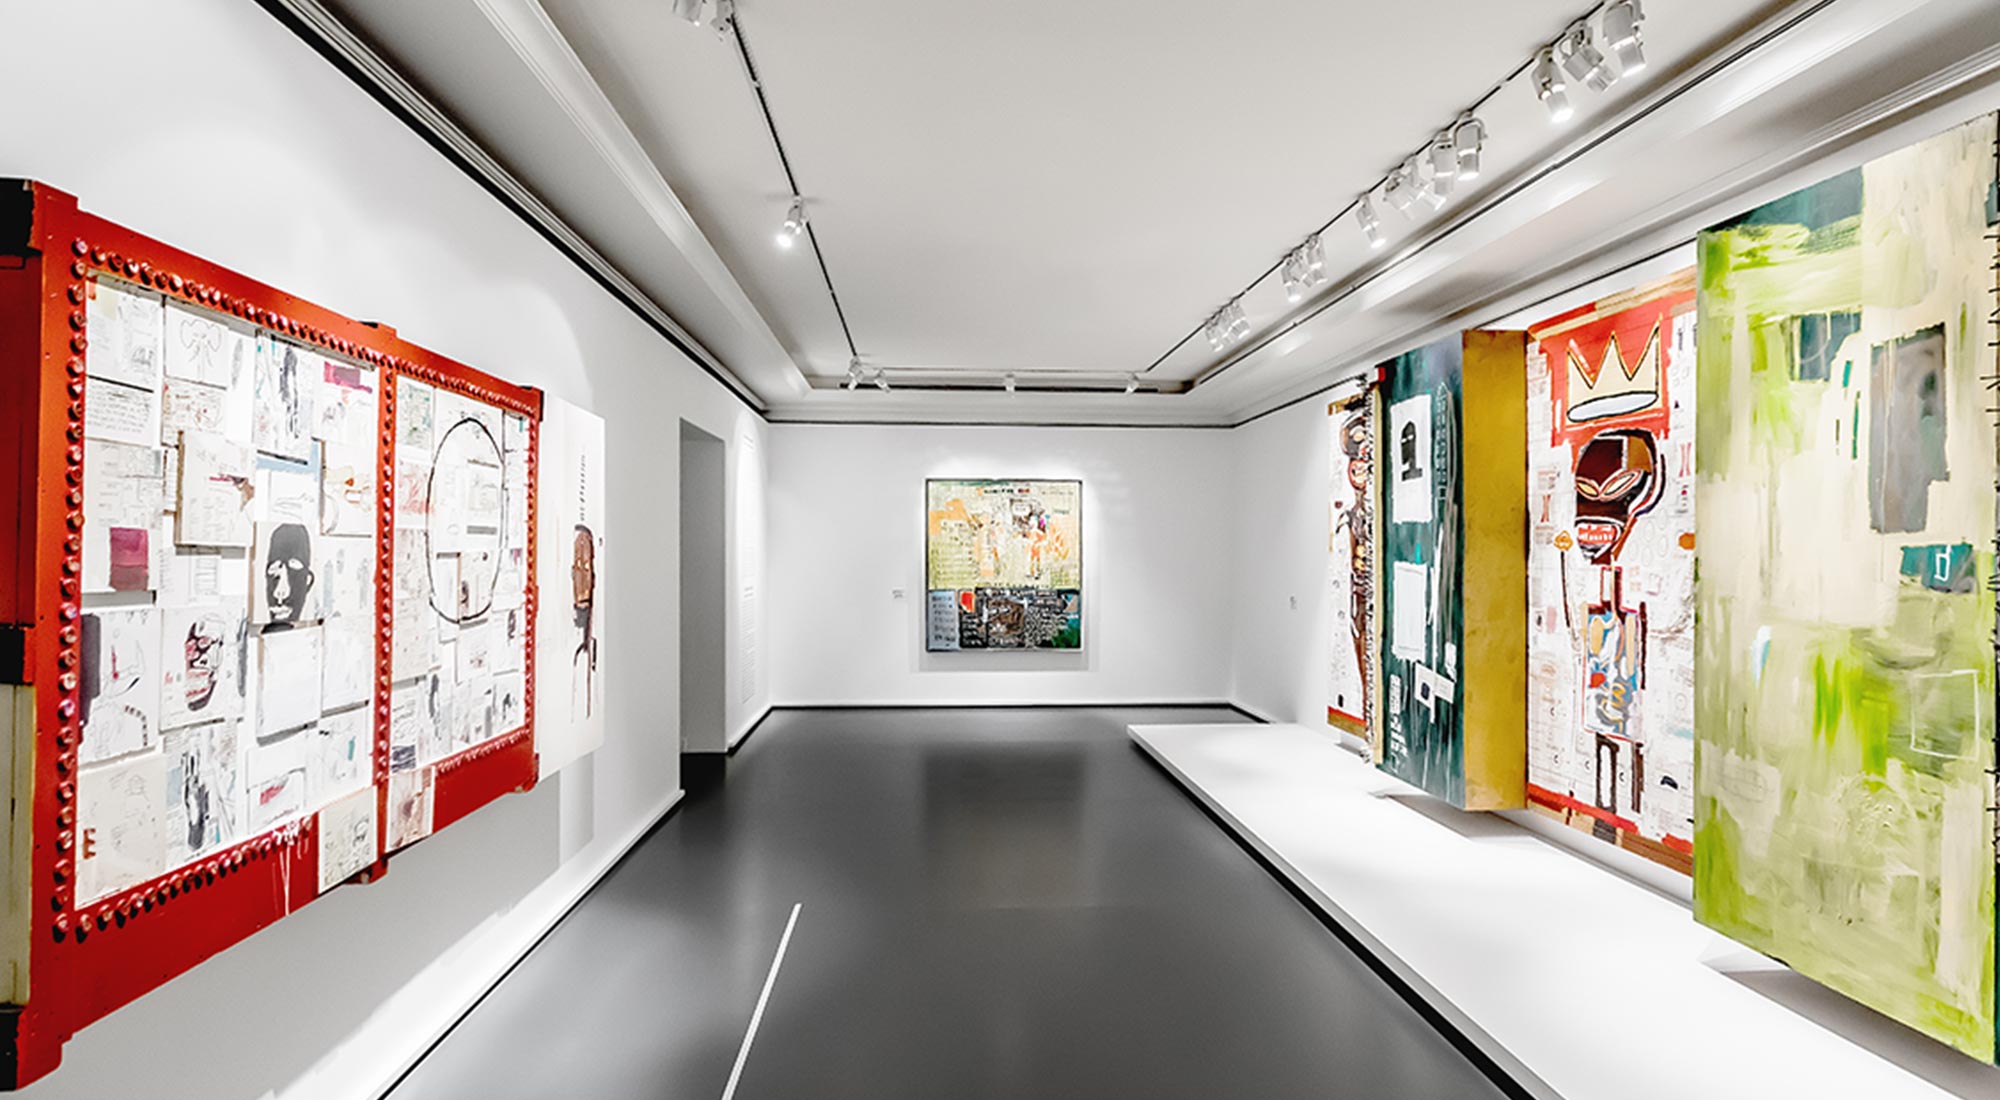 Major Modern Russian collection heads to Fondation Louis Vuitton